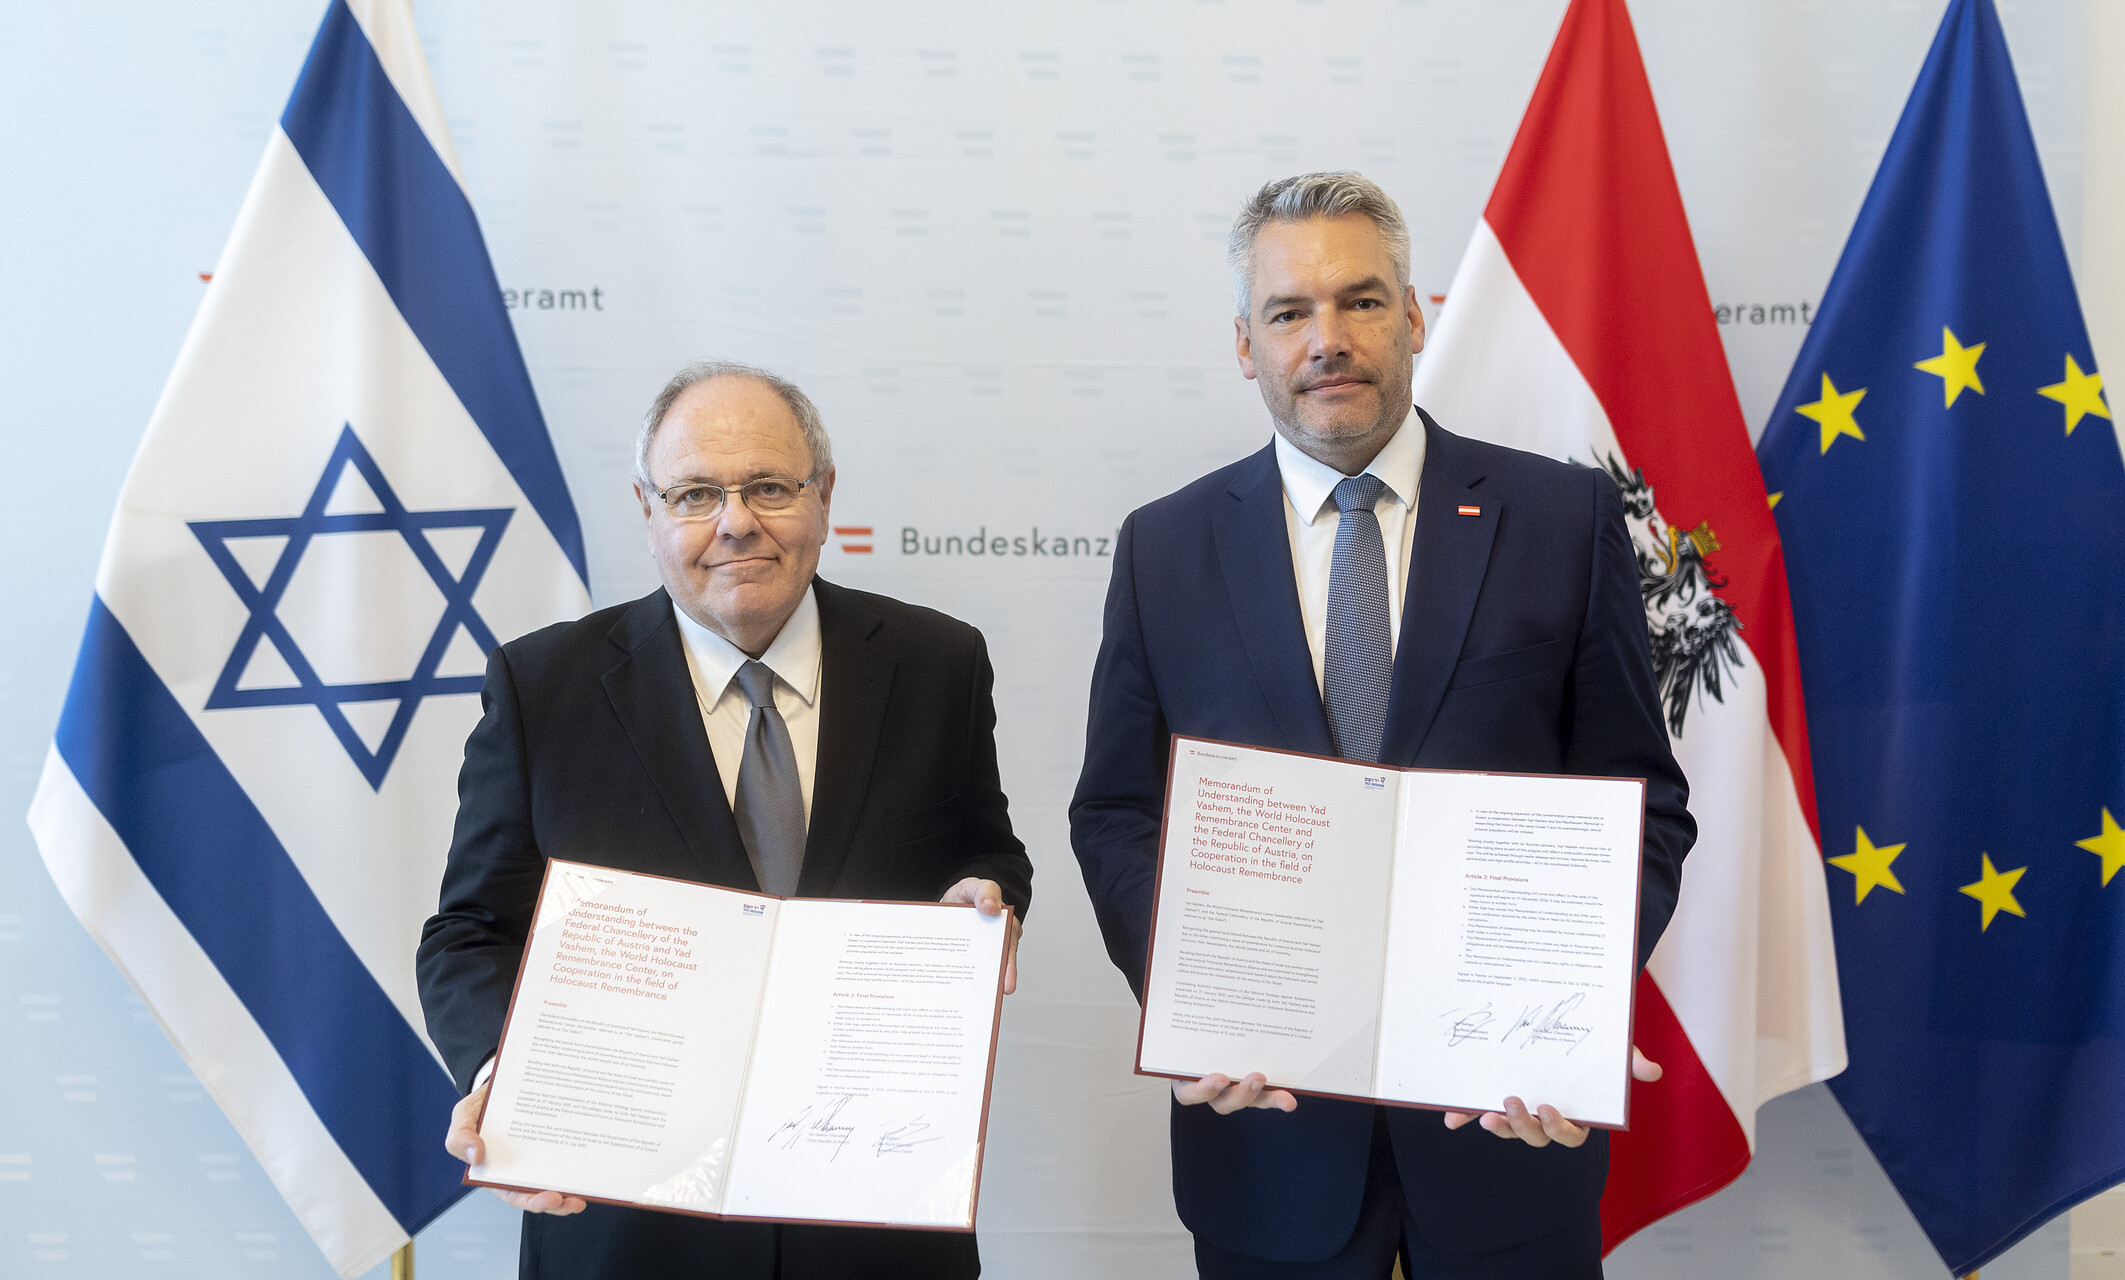 Dani Dayan and Karl Nehammer in Vienna signed a new MoU between Yad Vashem and the Austrian Chancellery 